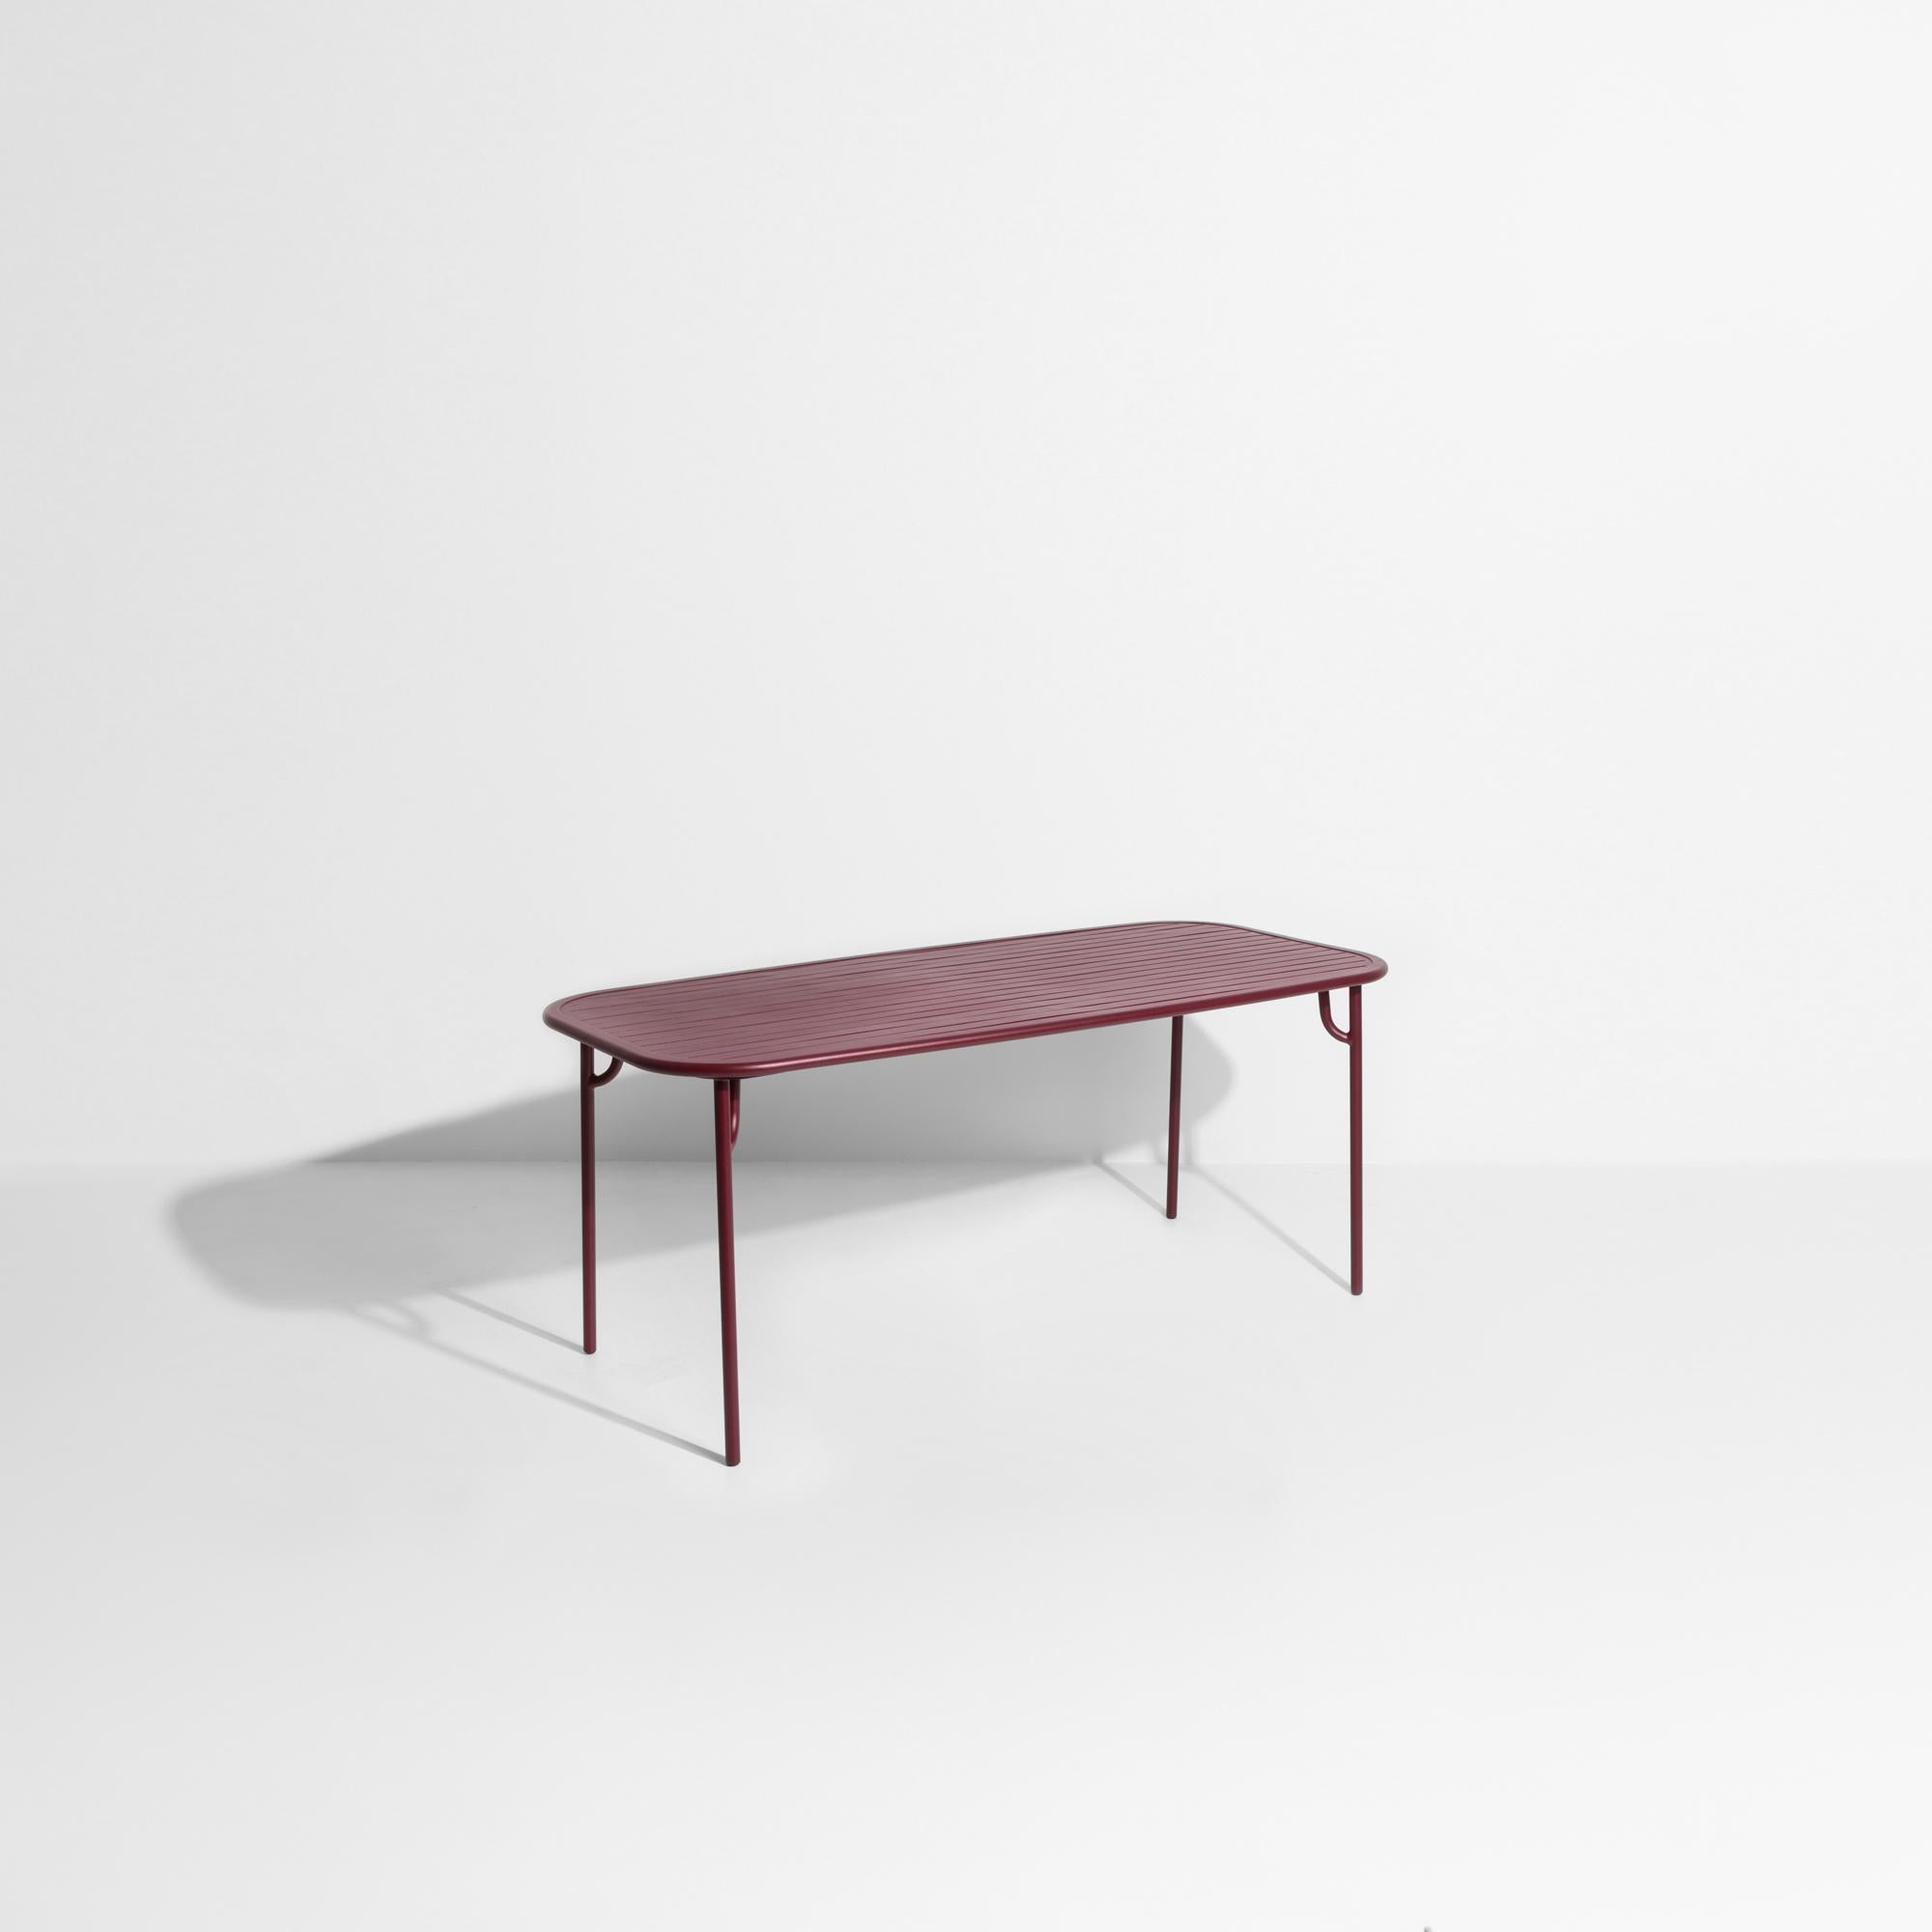 Contemporary Petite Friture Week-End Medium Rectangular Dining Table in Burgundy with Slats  For Sale